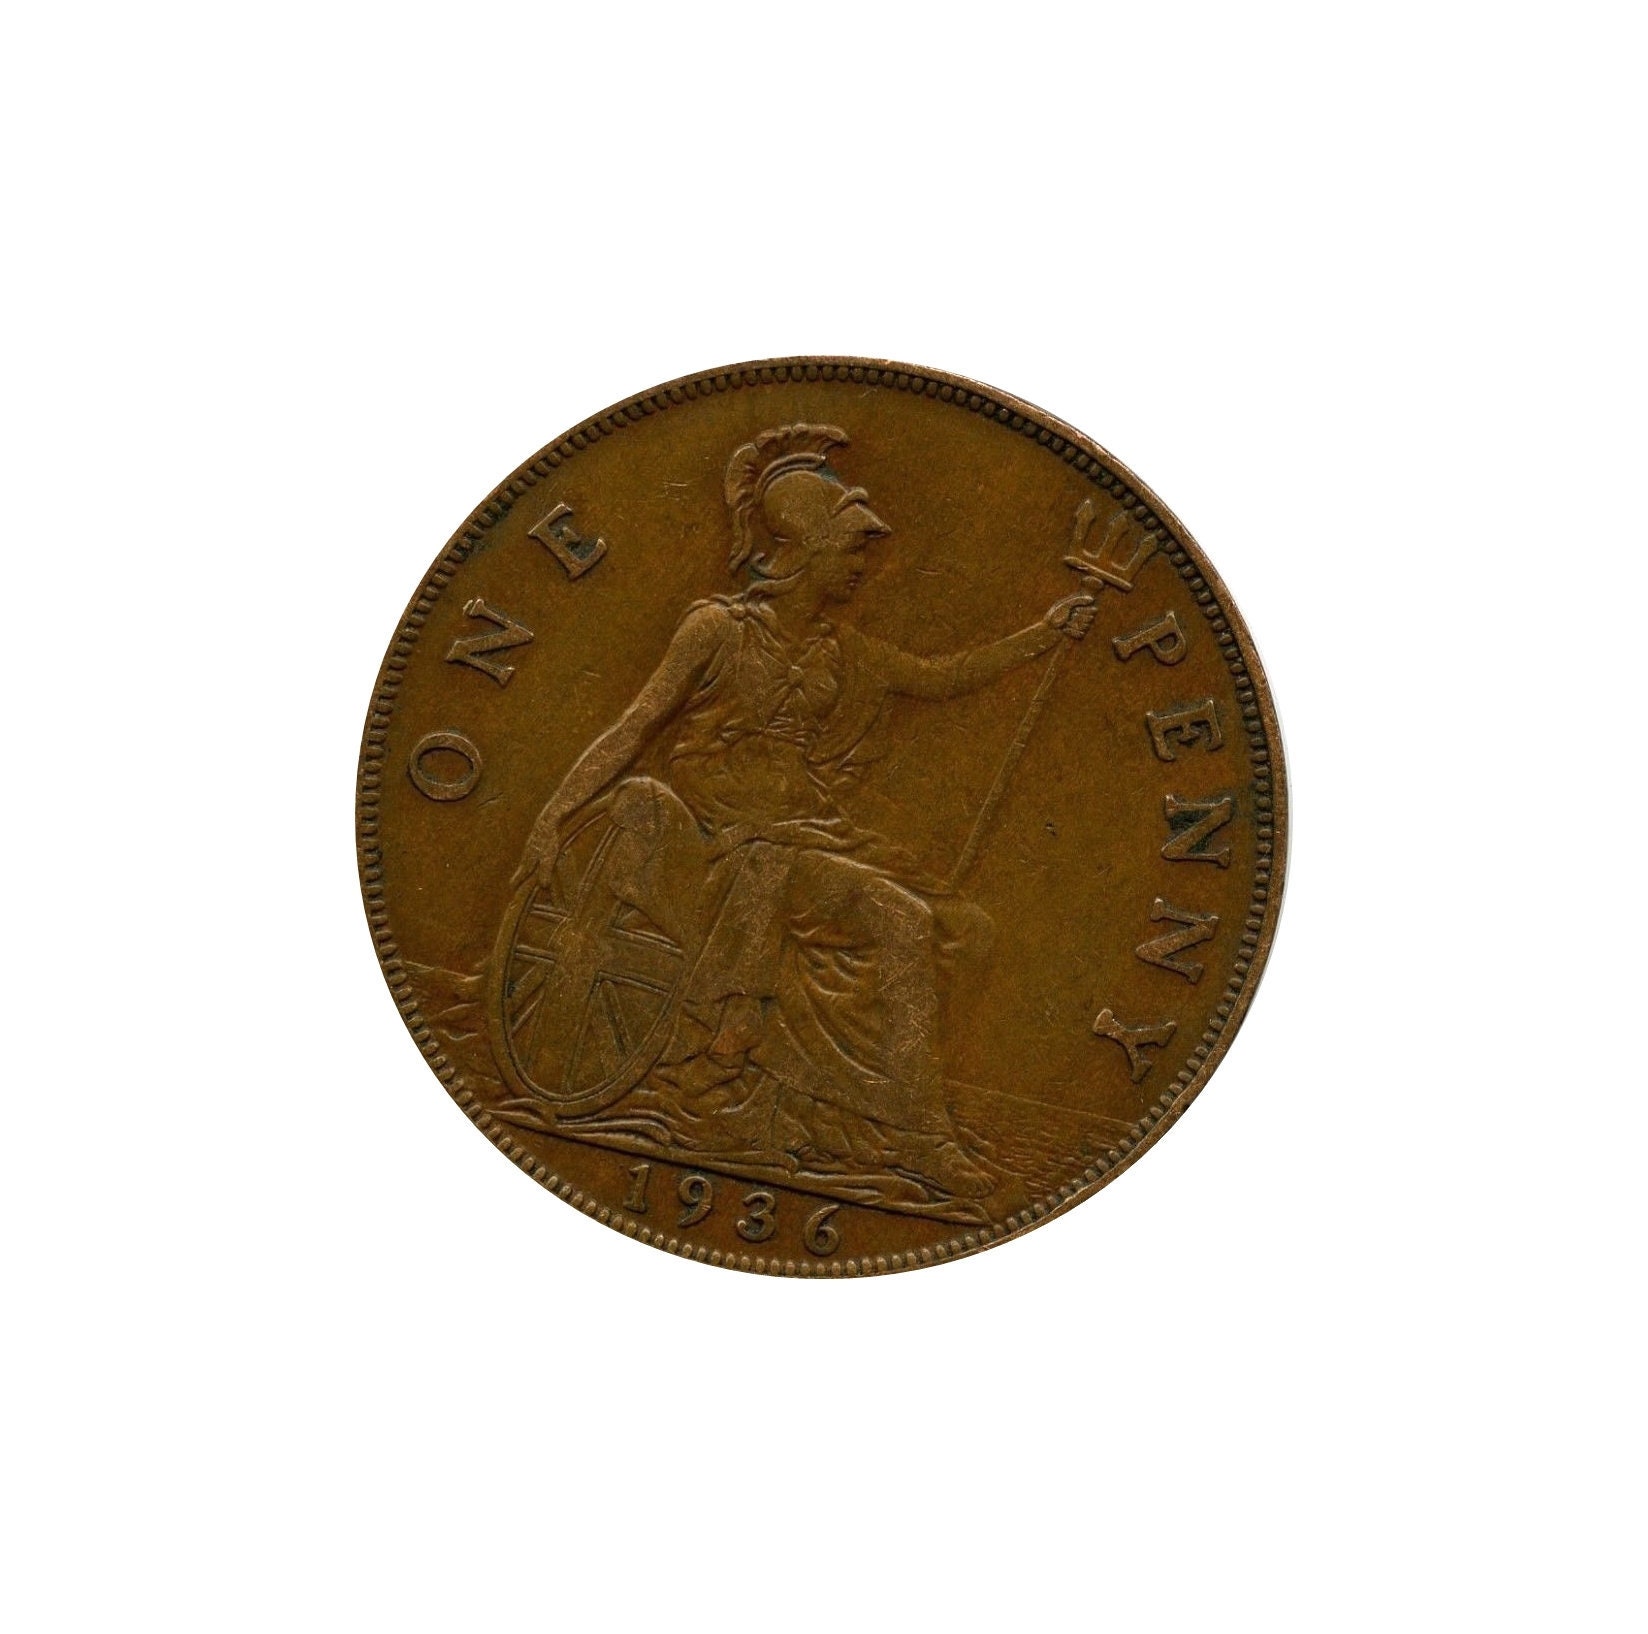 Coin One Penny 1936